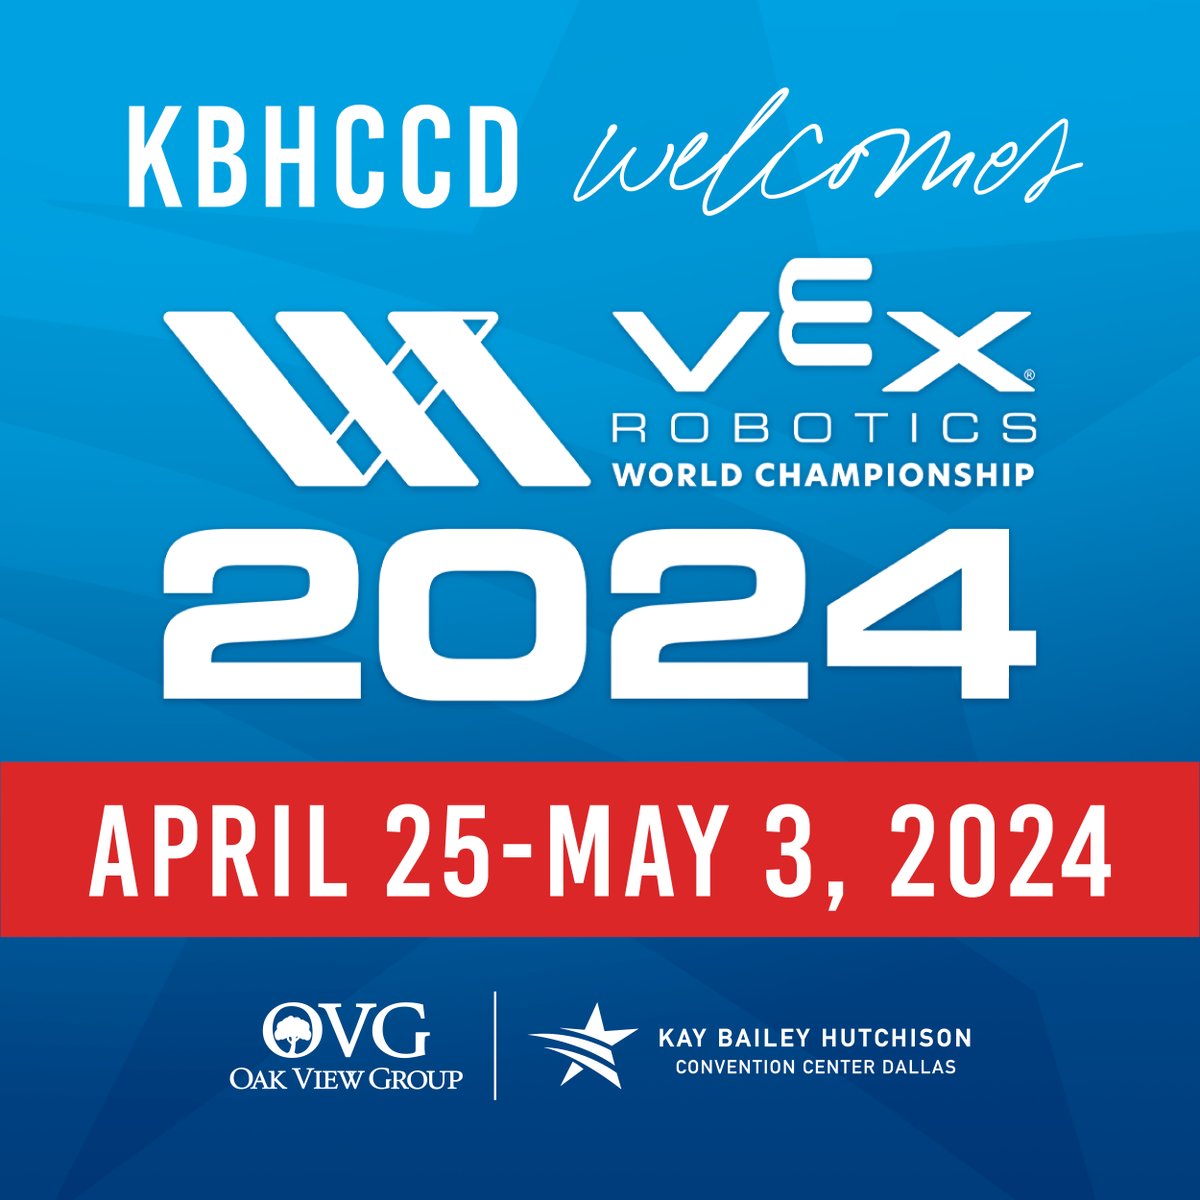 Join us in welcoming the world’s biggest robotics showdown back to #KBHCCD! 🤖🏆 The @VEXRobotics 𝗪𝗼𝗿𝗹𝗱 𝗖𝗵𝗮𝗺𝗽𝗶𝗼𝗻𝘀𝗵𝗶𝗽 will be held April 25-May 3. #VEXworlds 
🍴 Retail/Concessions Menu: bit.ly/VEXWorlds24Menu